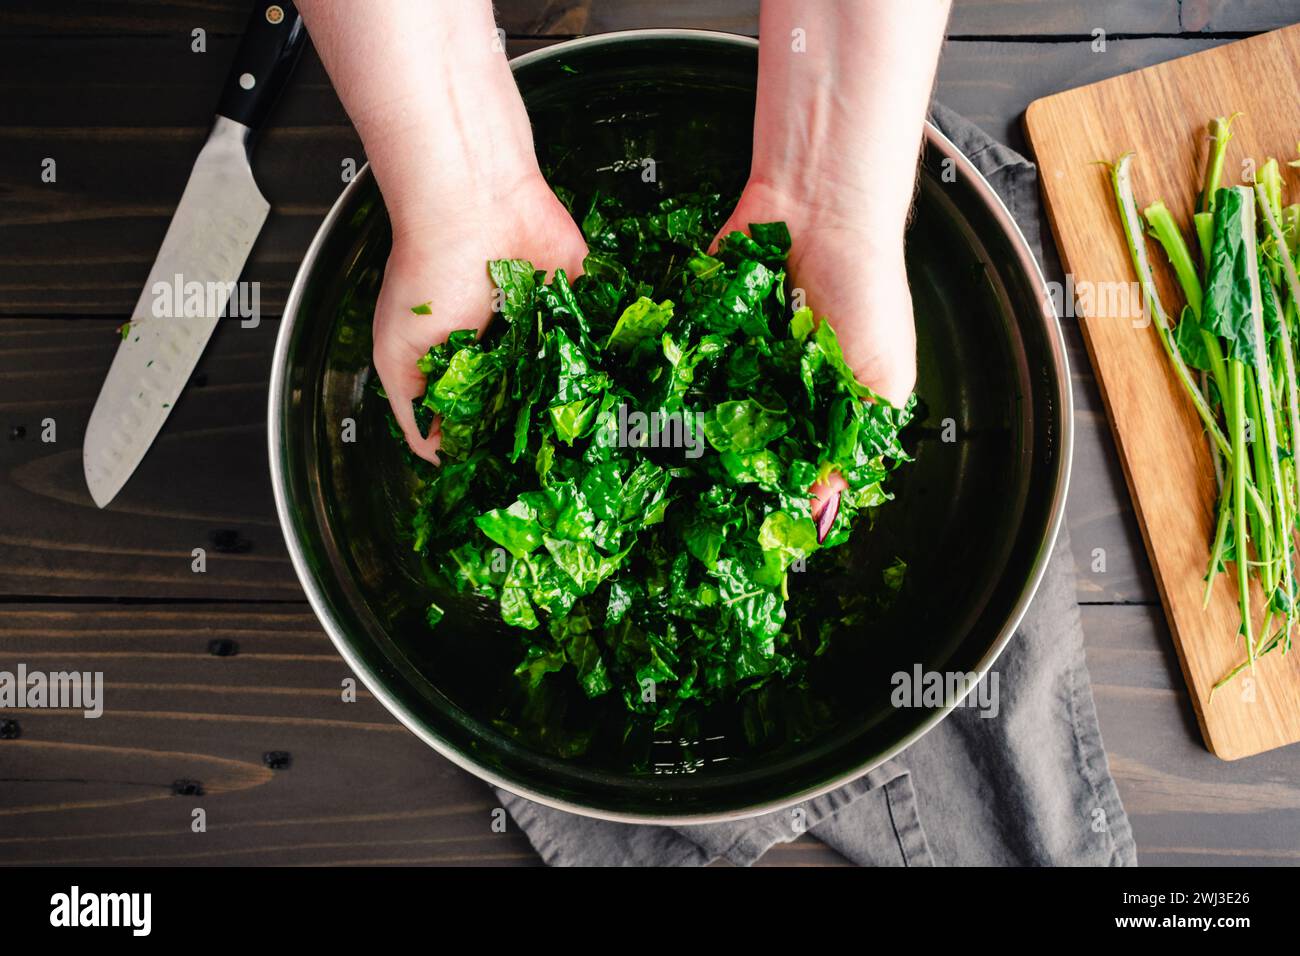 Massaging Chopped Tuscan Kale Leaves in Olive Oil: Hands holding chopped lacinato kale leaves massaged in extra virgin olive oil Stock Photo